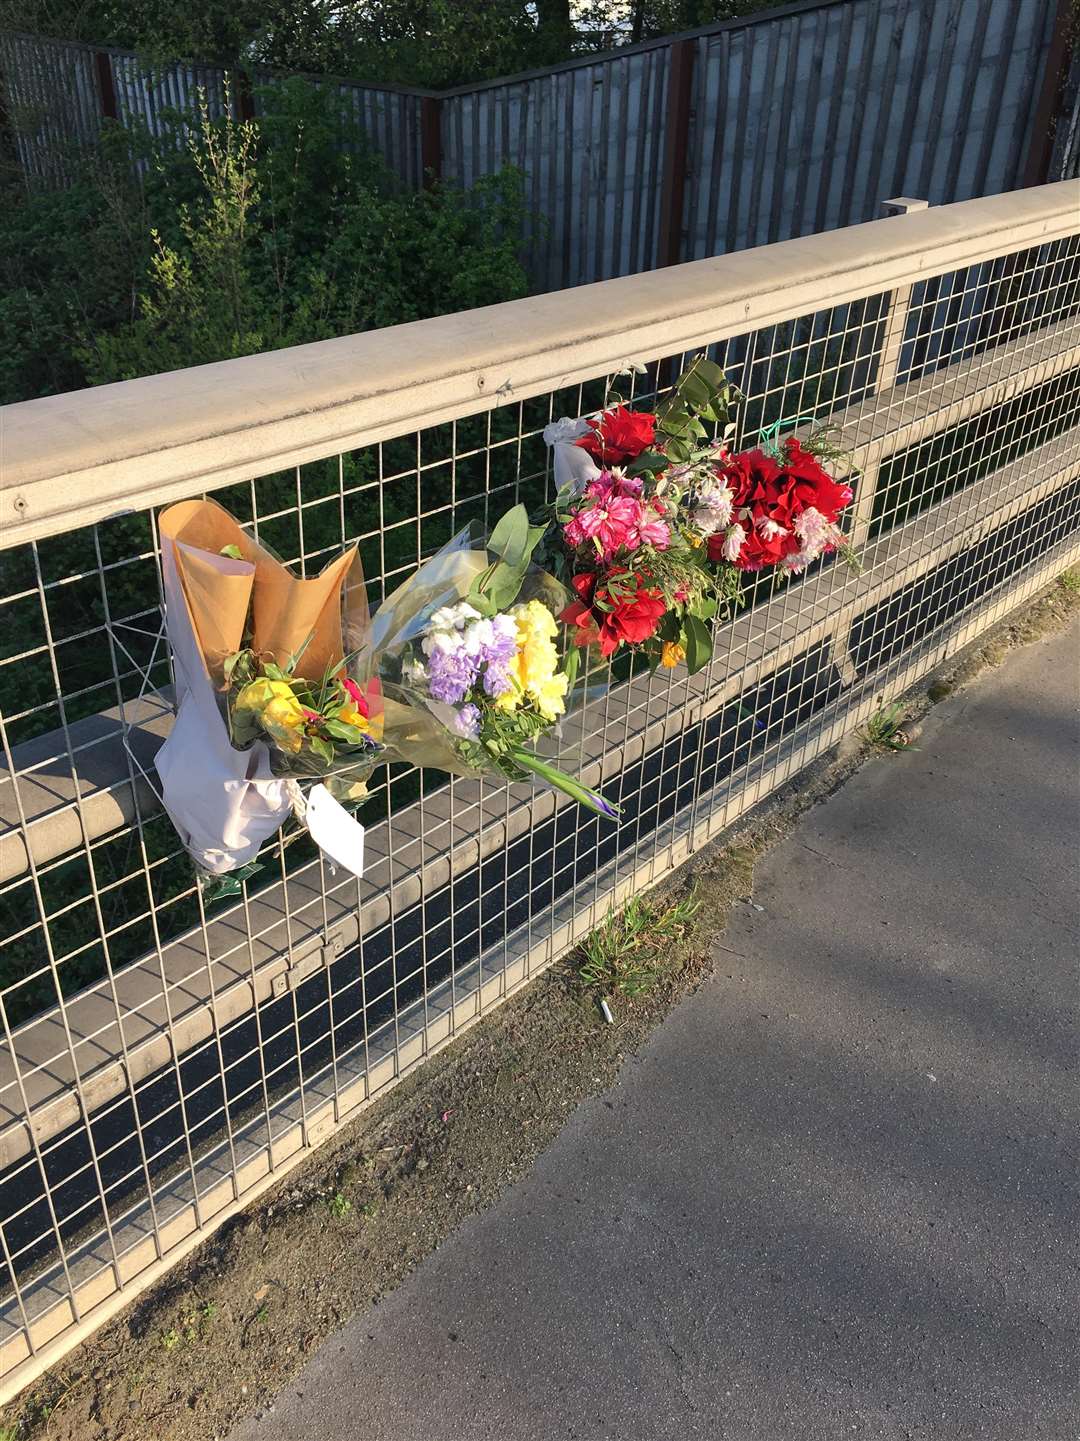 More flowers have been placed on Lunsford Lane bridge.